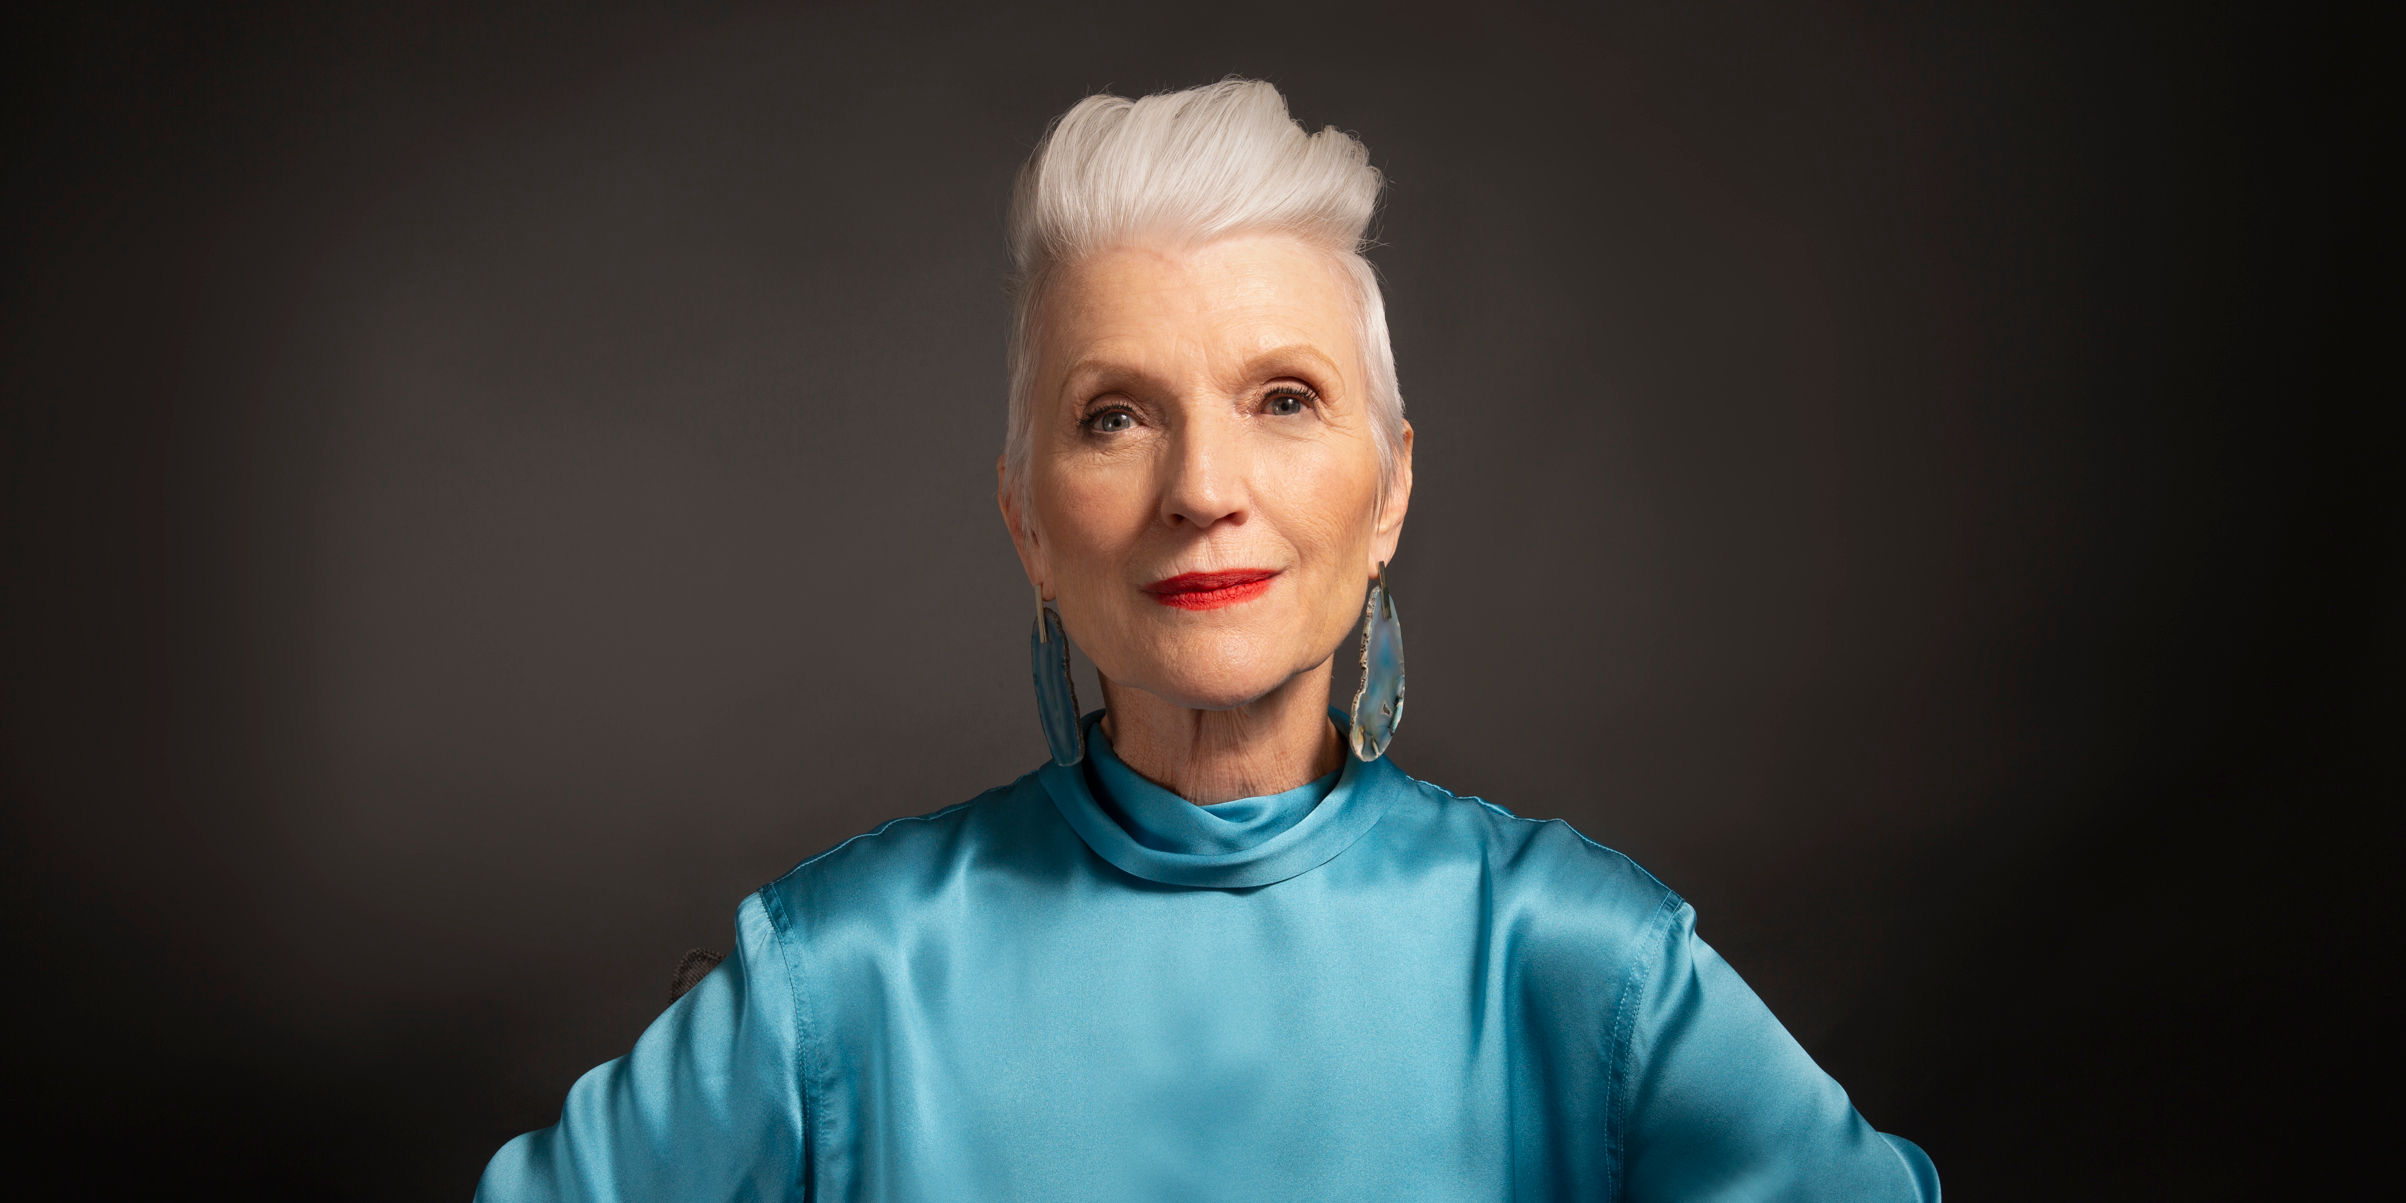 Elon Musk’s mother, supermodel Maye Musk, talks about raising successful children and leveling up her career at every age